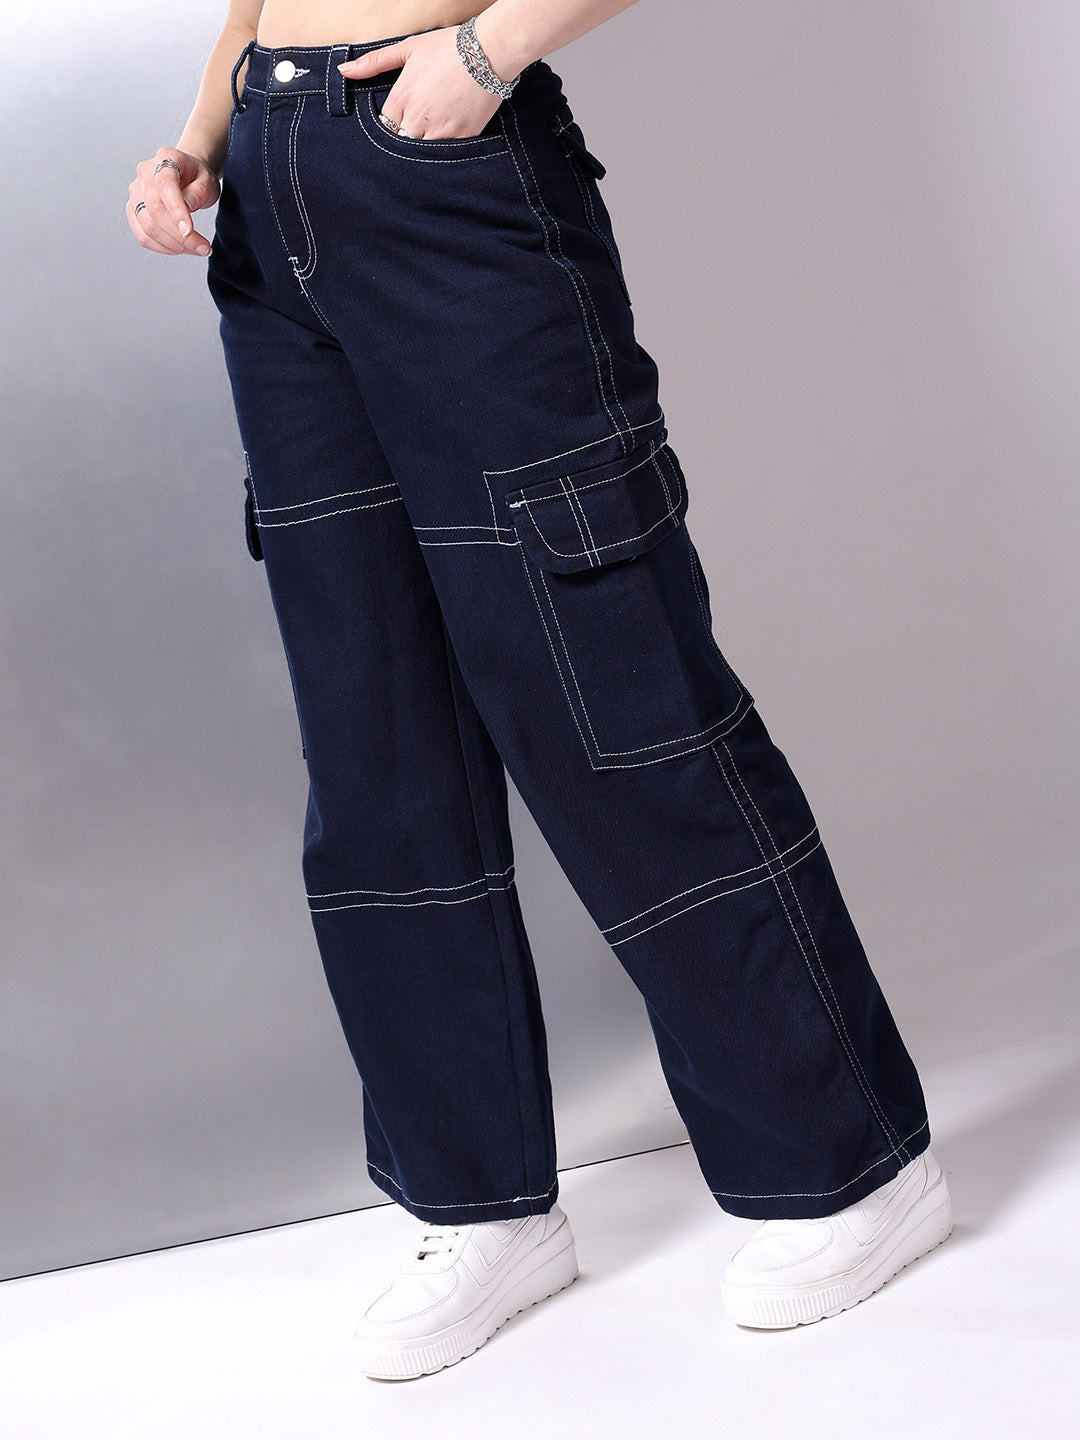 Shop Women Relaxed Fit Jeans Online.